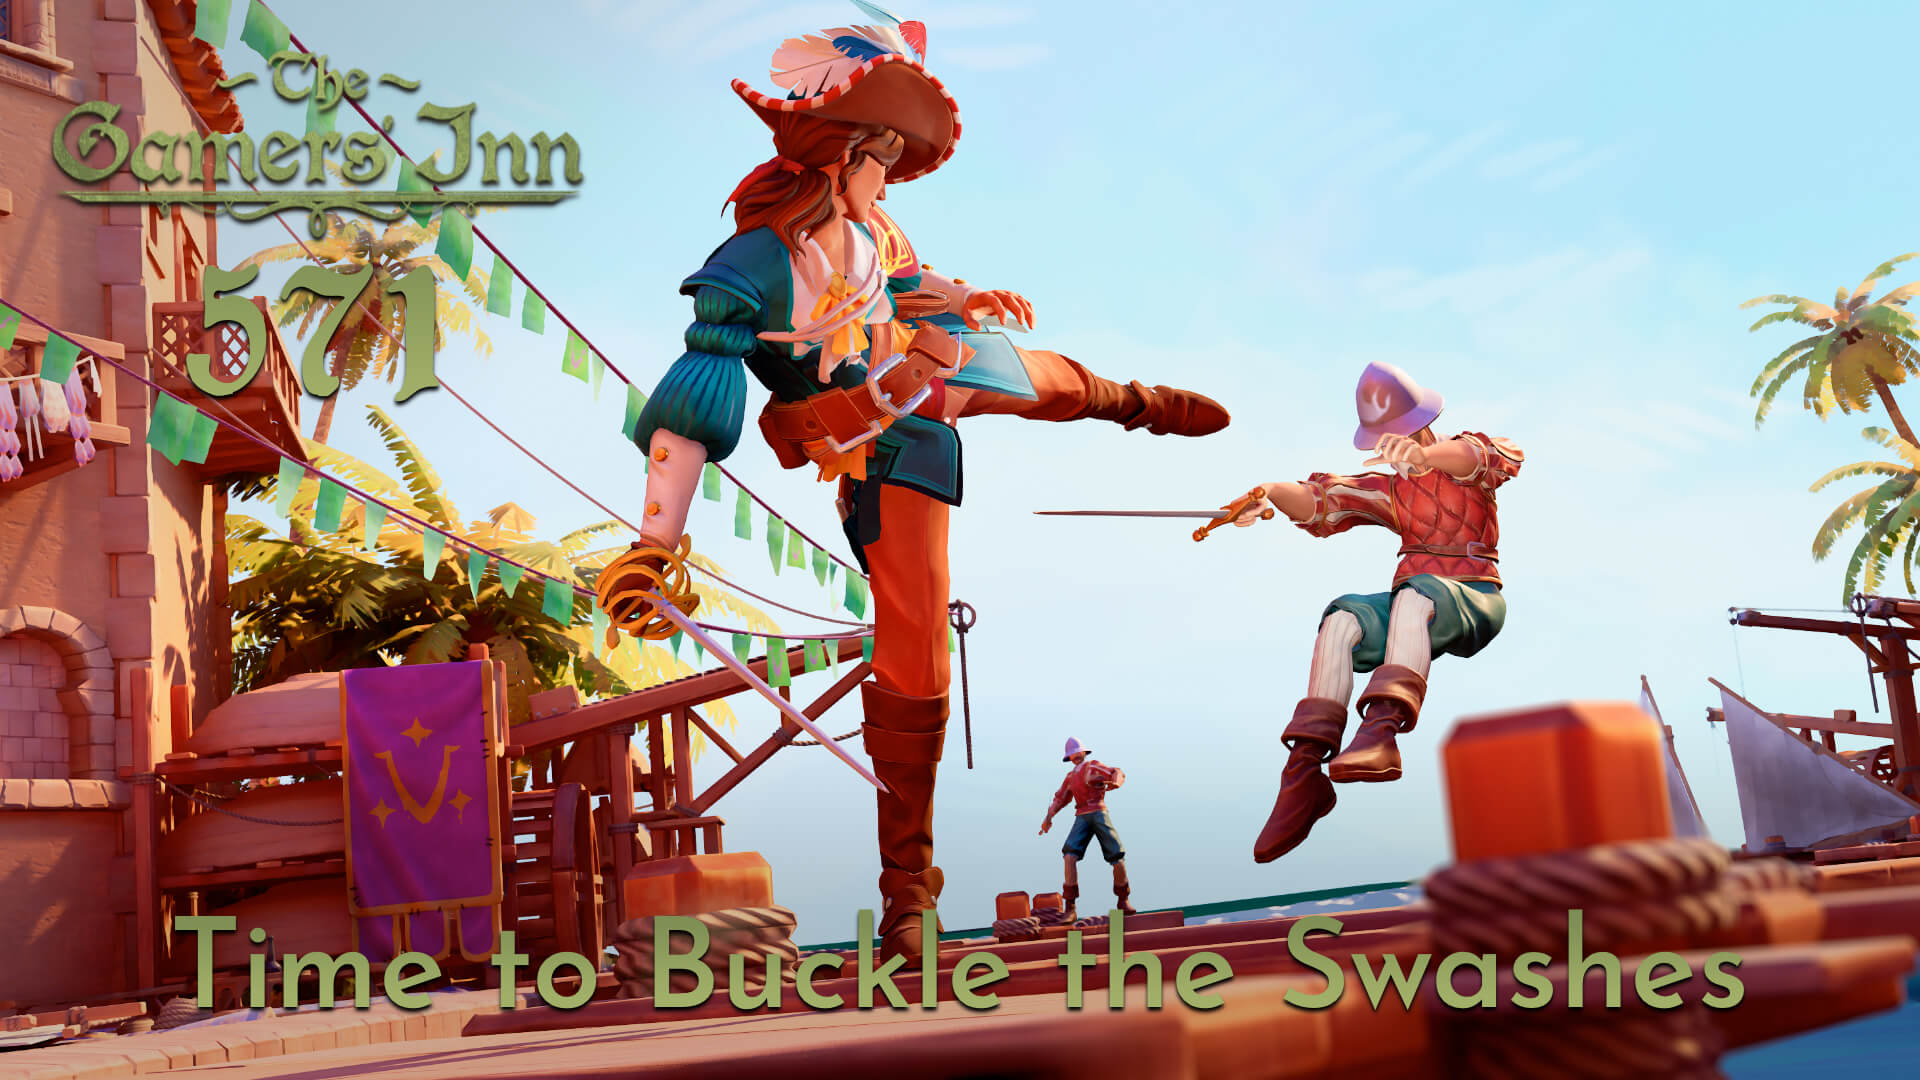 TGI 571 – Time to Buckle the Swashes